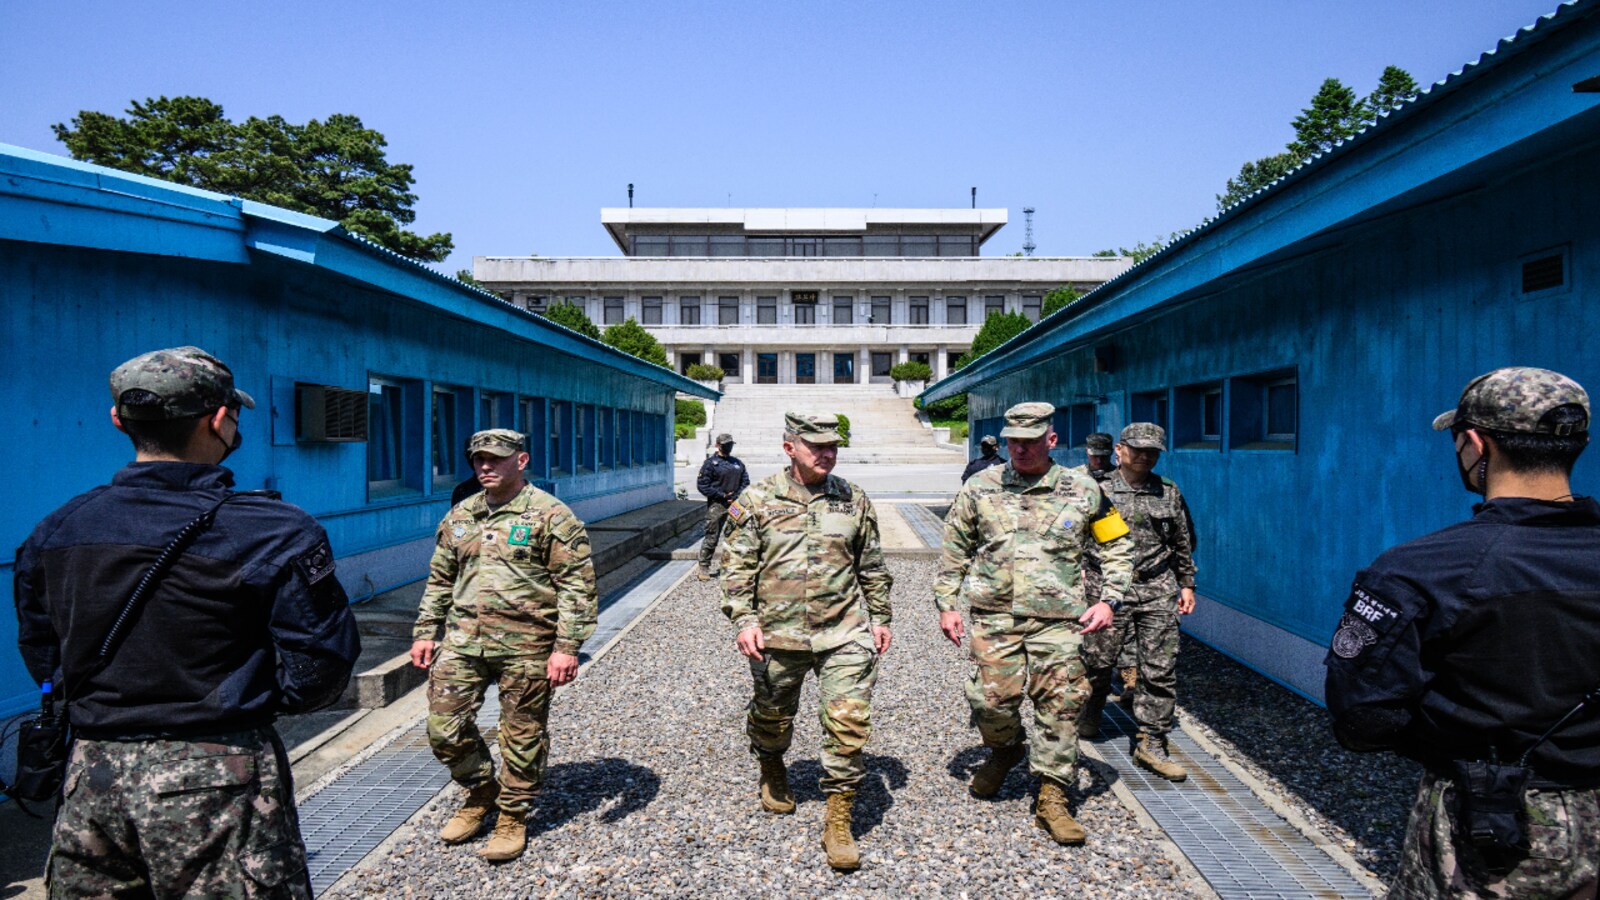 North Korea detains US soldier after unauthorized border crossing